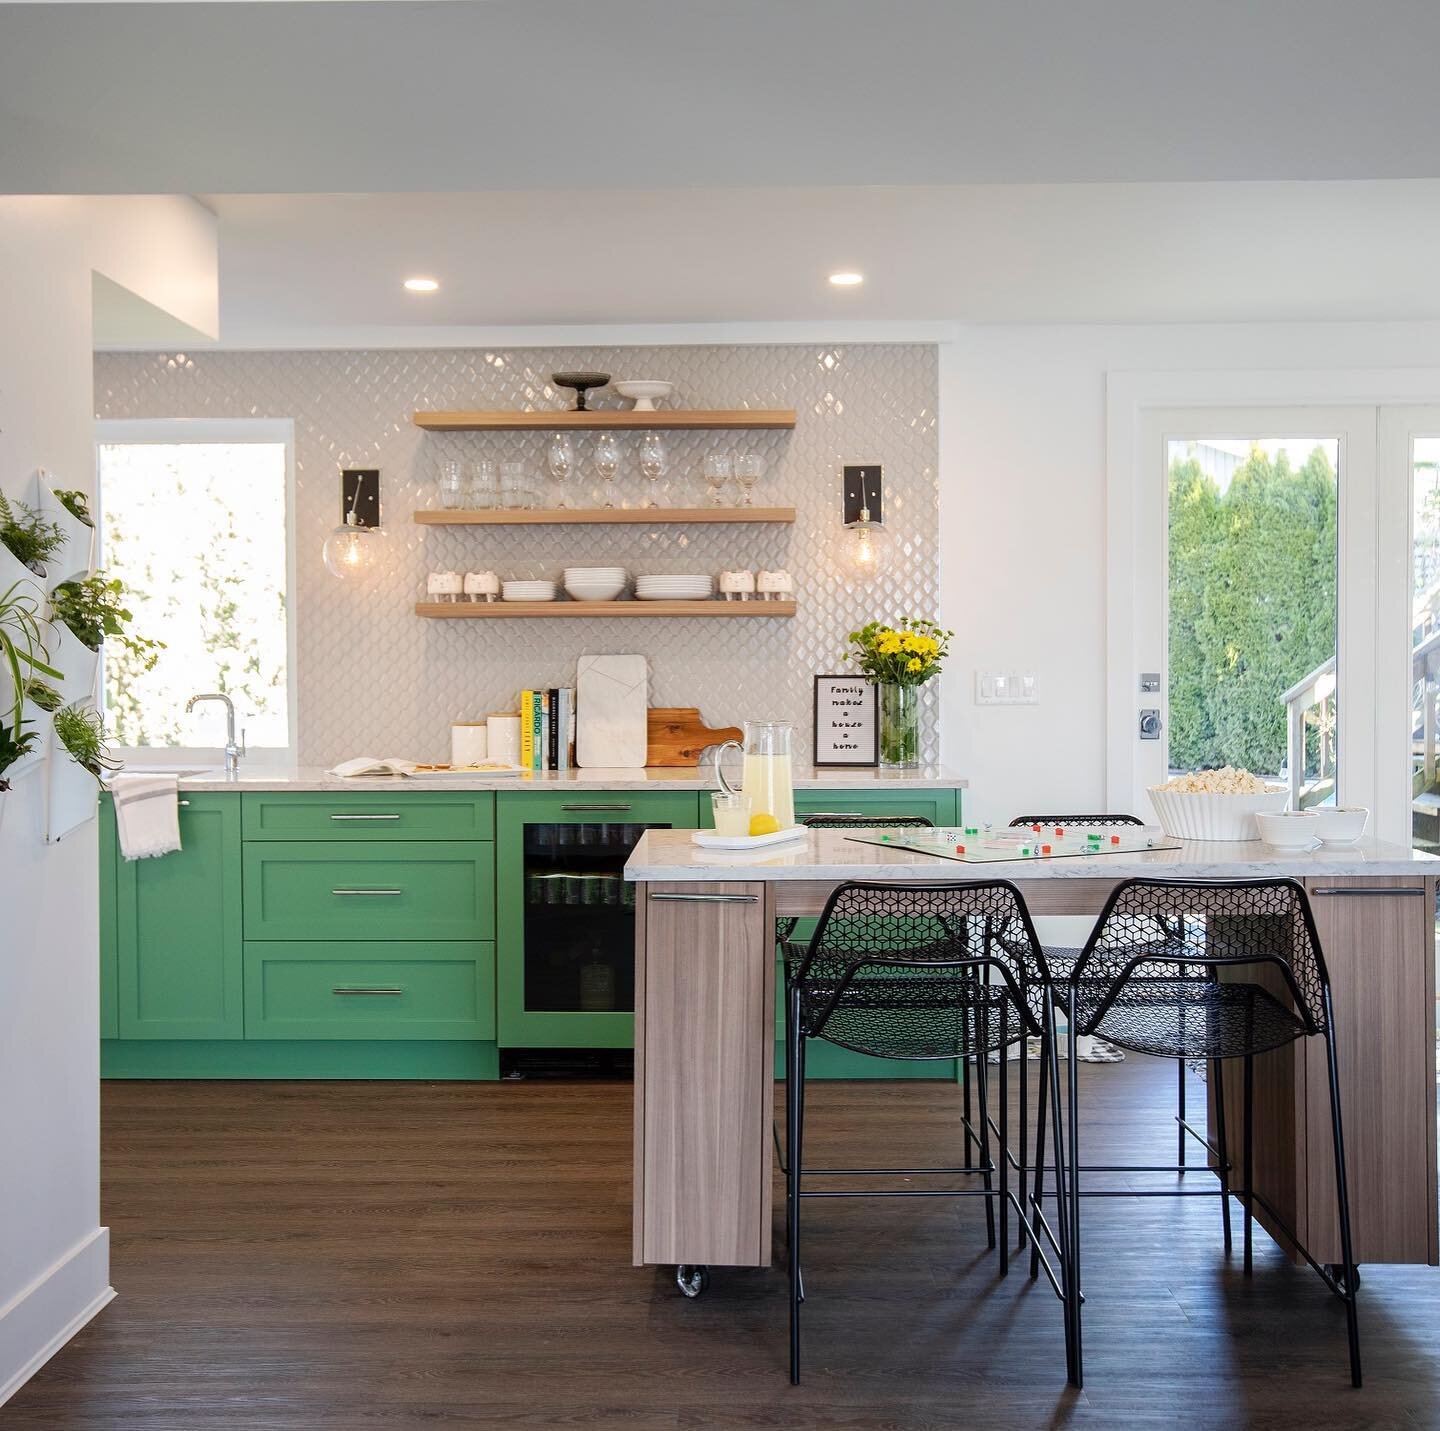 Throwback to Daniel Meloche Design's kelly green kitchen 😍
Fabrication and installation by us!